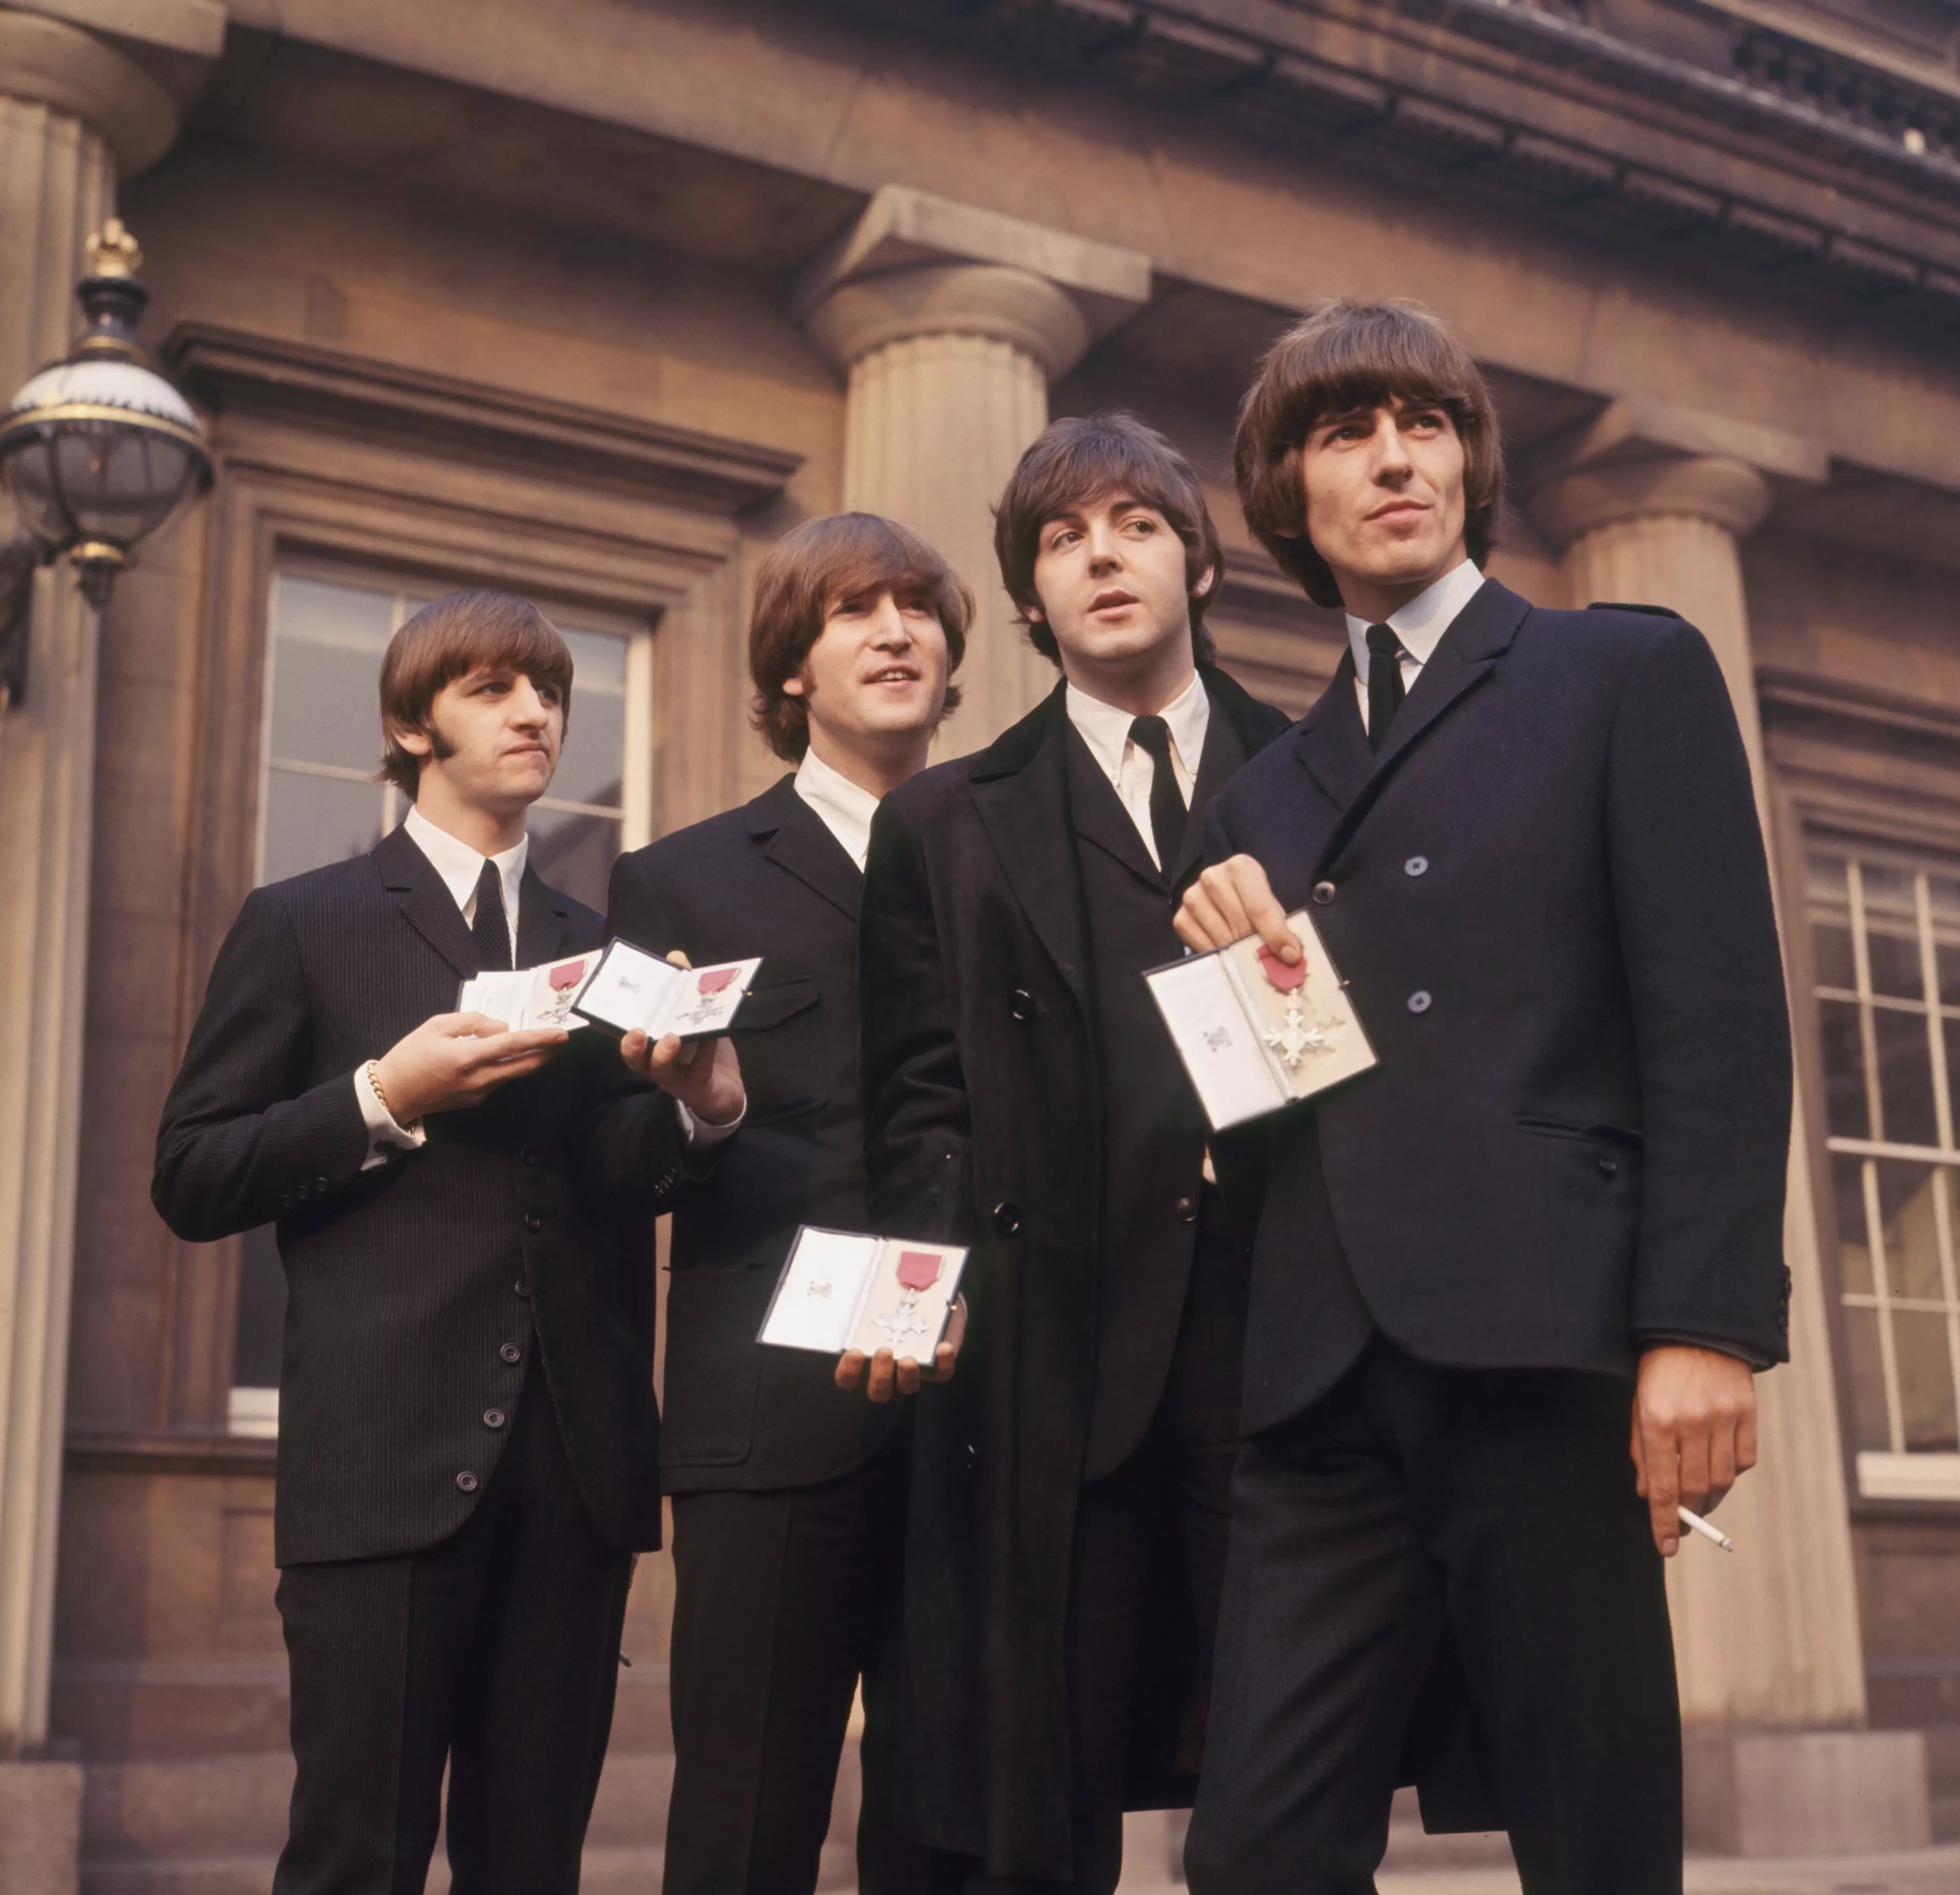 The Beatles: Get Back will be released on 4 September.